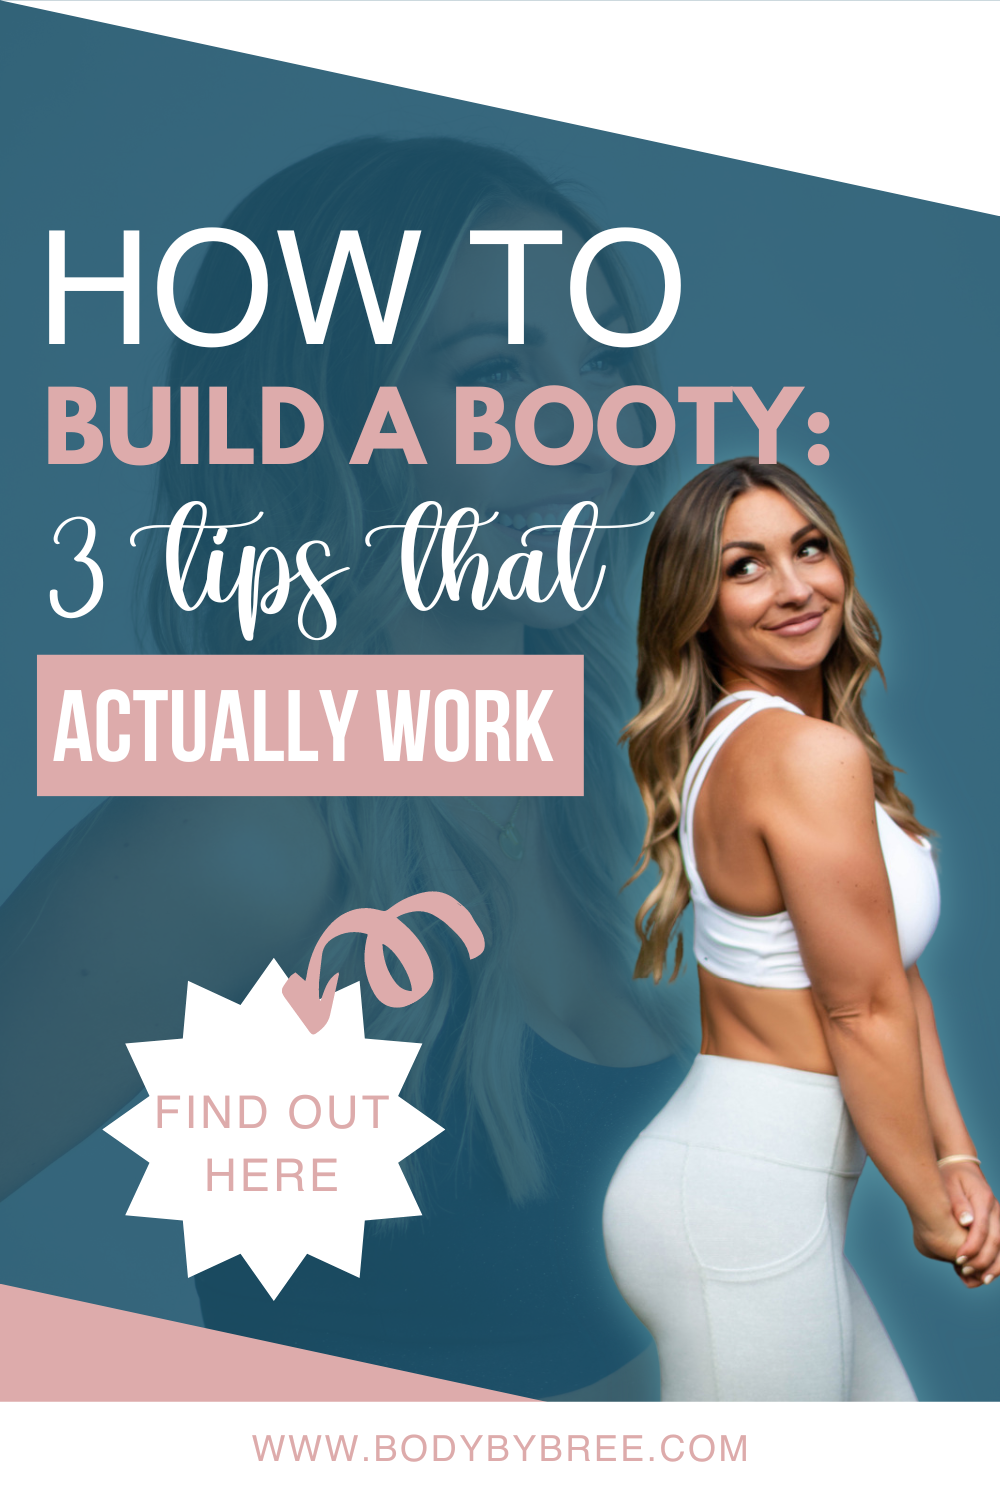 HOW TO BUILD A BOOTY: 3 TIPS THAT ACTUALLY WORK